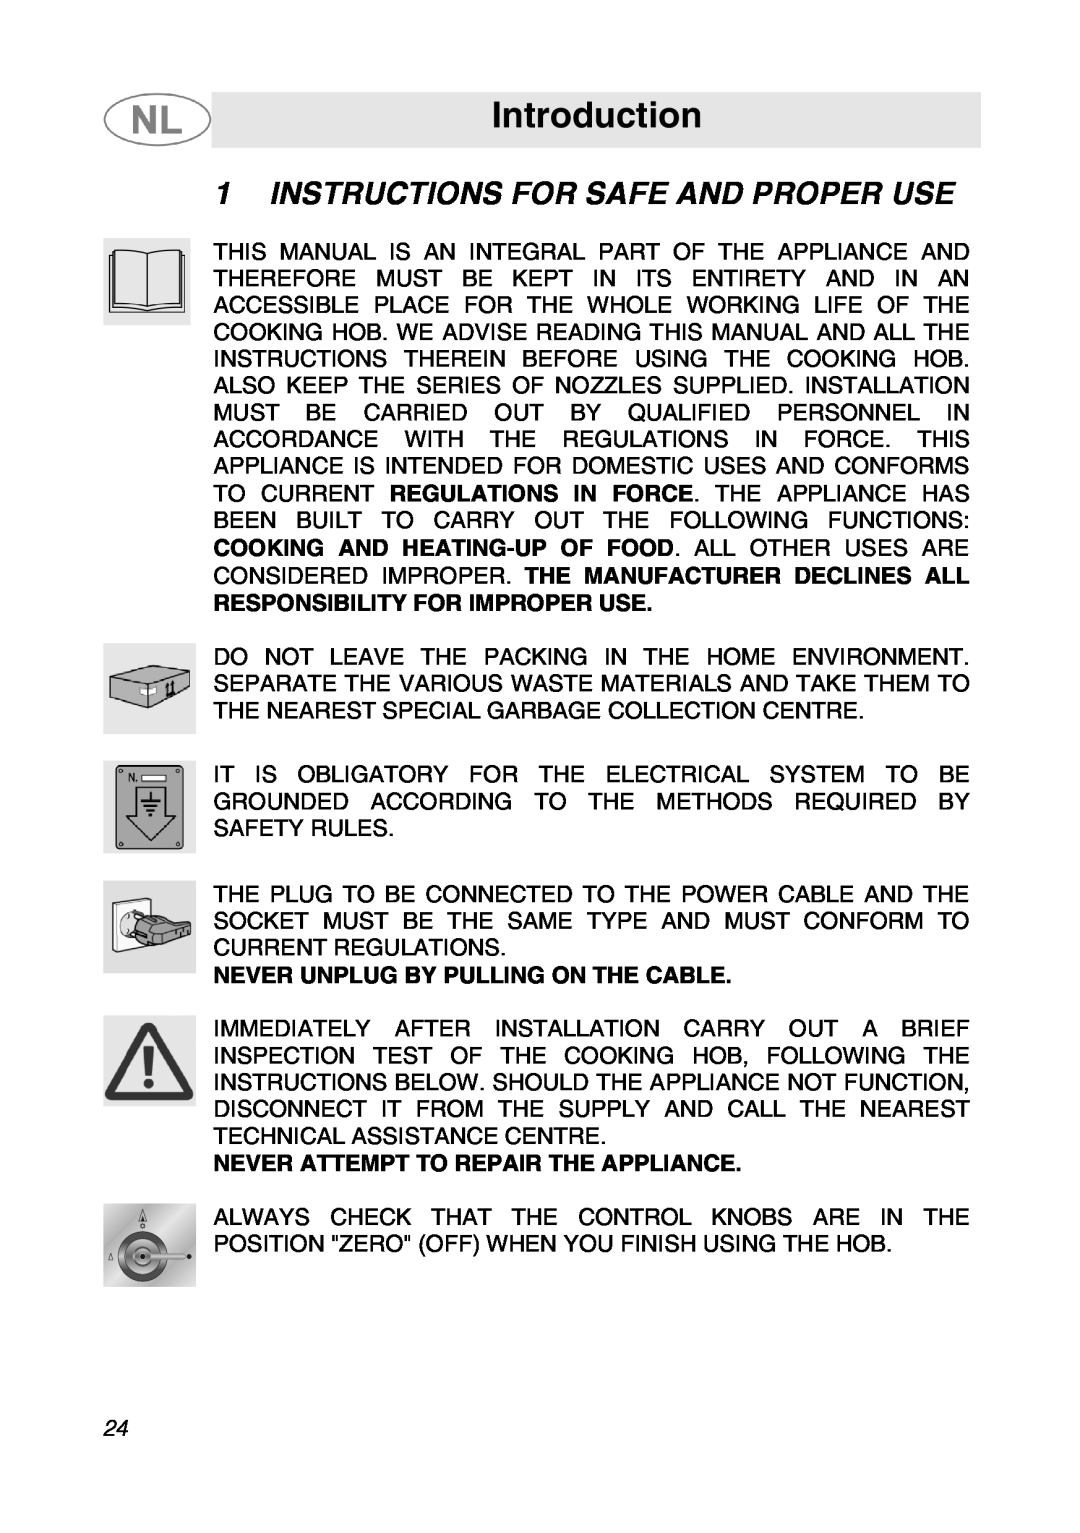 Smeg GKC95-3, GKC64-3 manual Introduction, Instructions For Safe And Proper Use, Responsibility For Improper Use 